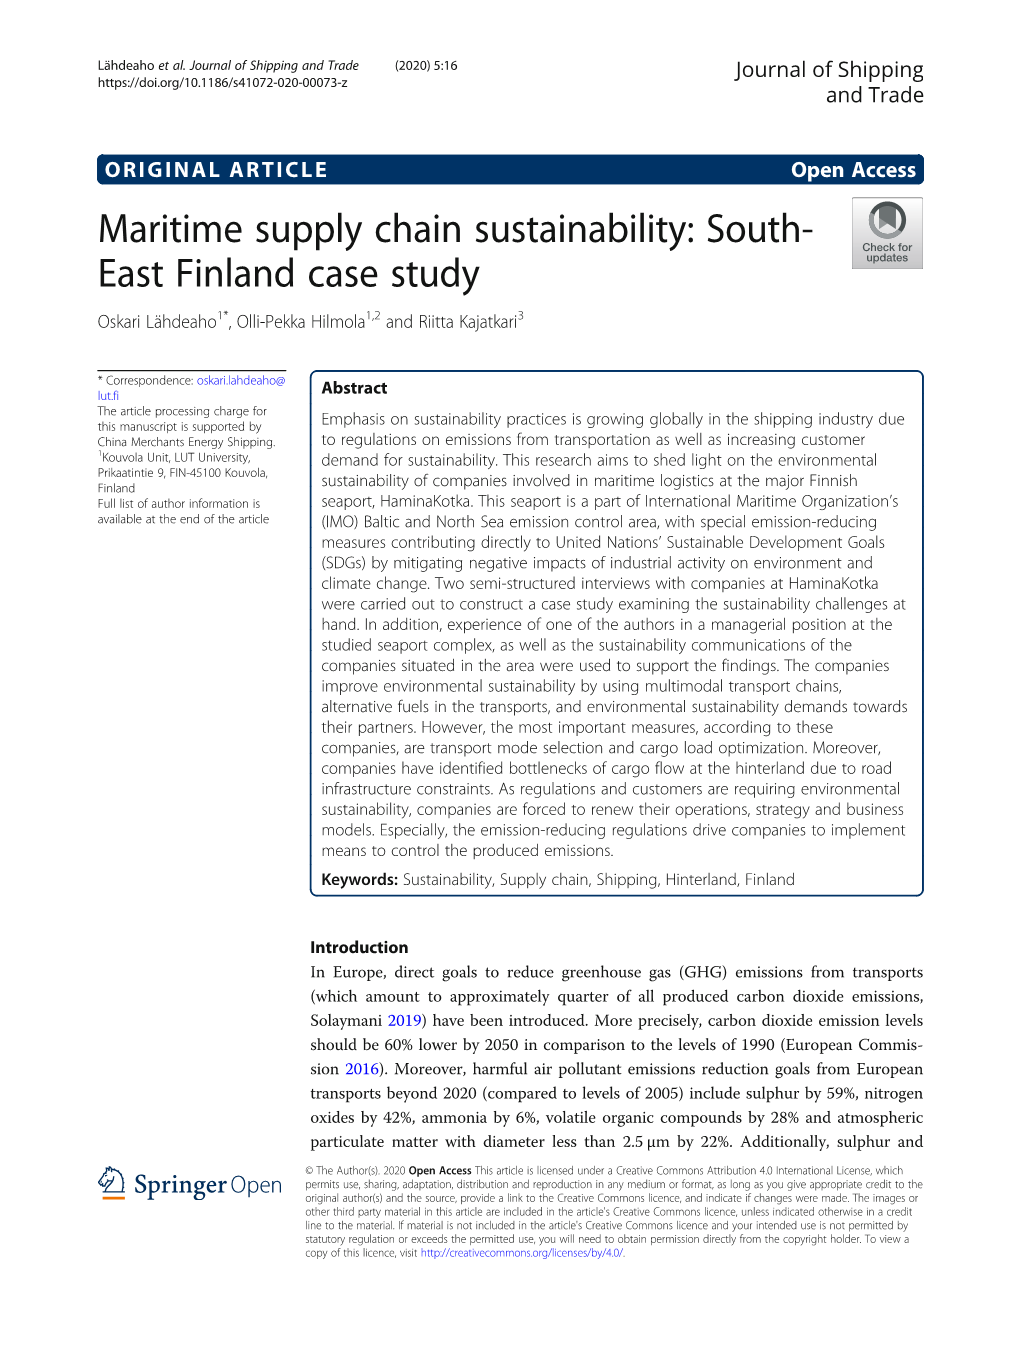 Maritime Supply Chain Sustainability: South-East Finland Case Study